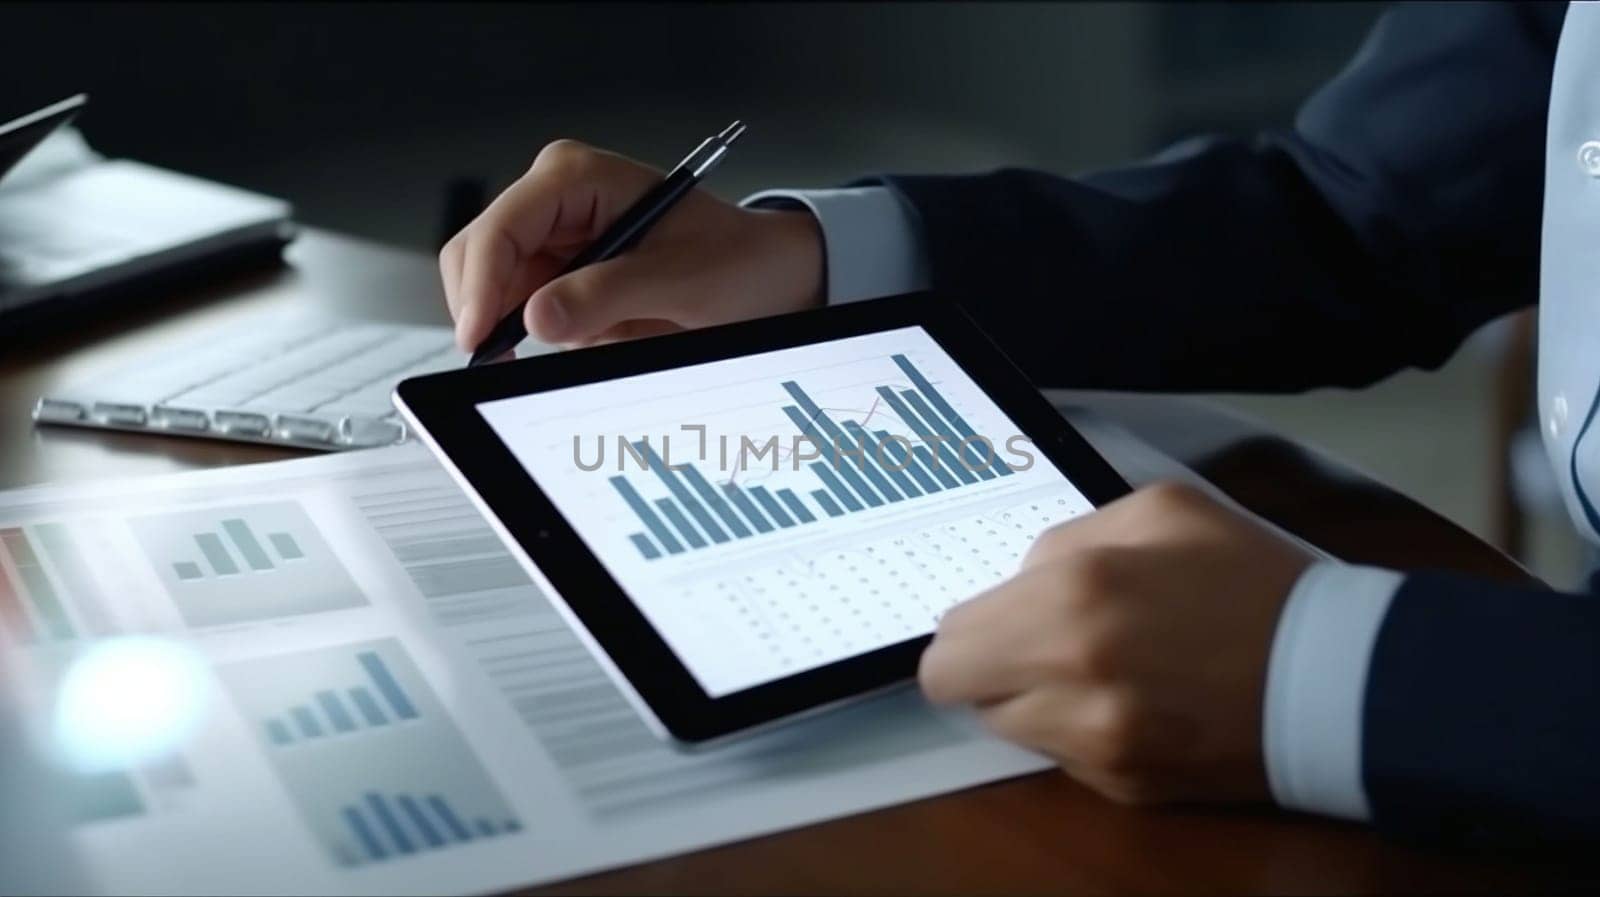 Financial businessmen analyze the graph of the company's performance to create profits and growth. Home finances, investment, economy, saving money or insurance concept. bookkeeper or financial inspector hands calculate making a report, calculating or checking balance. by Costin